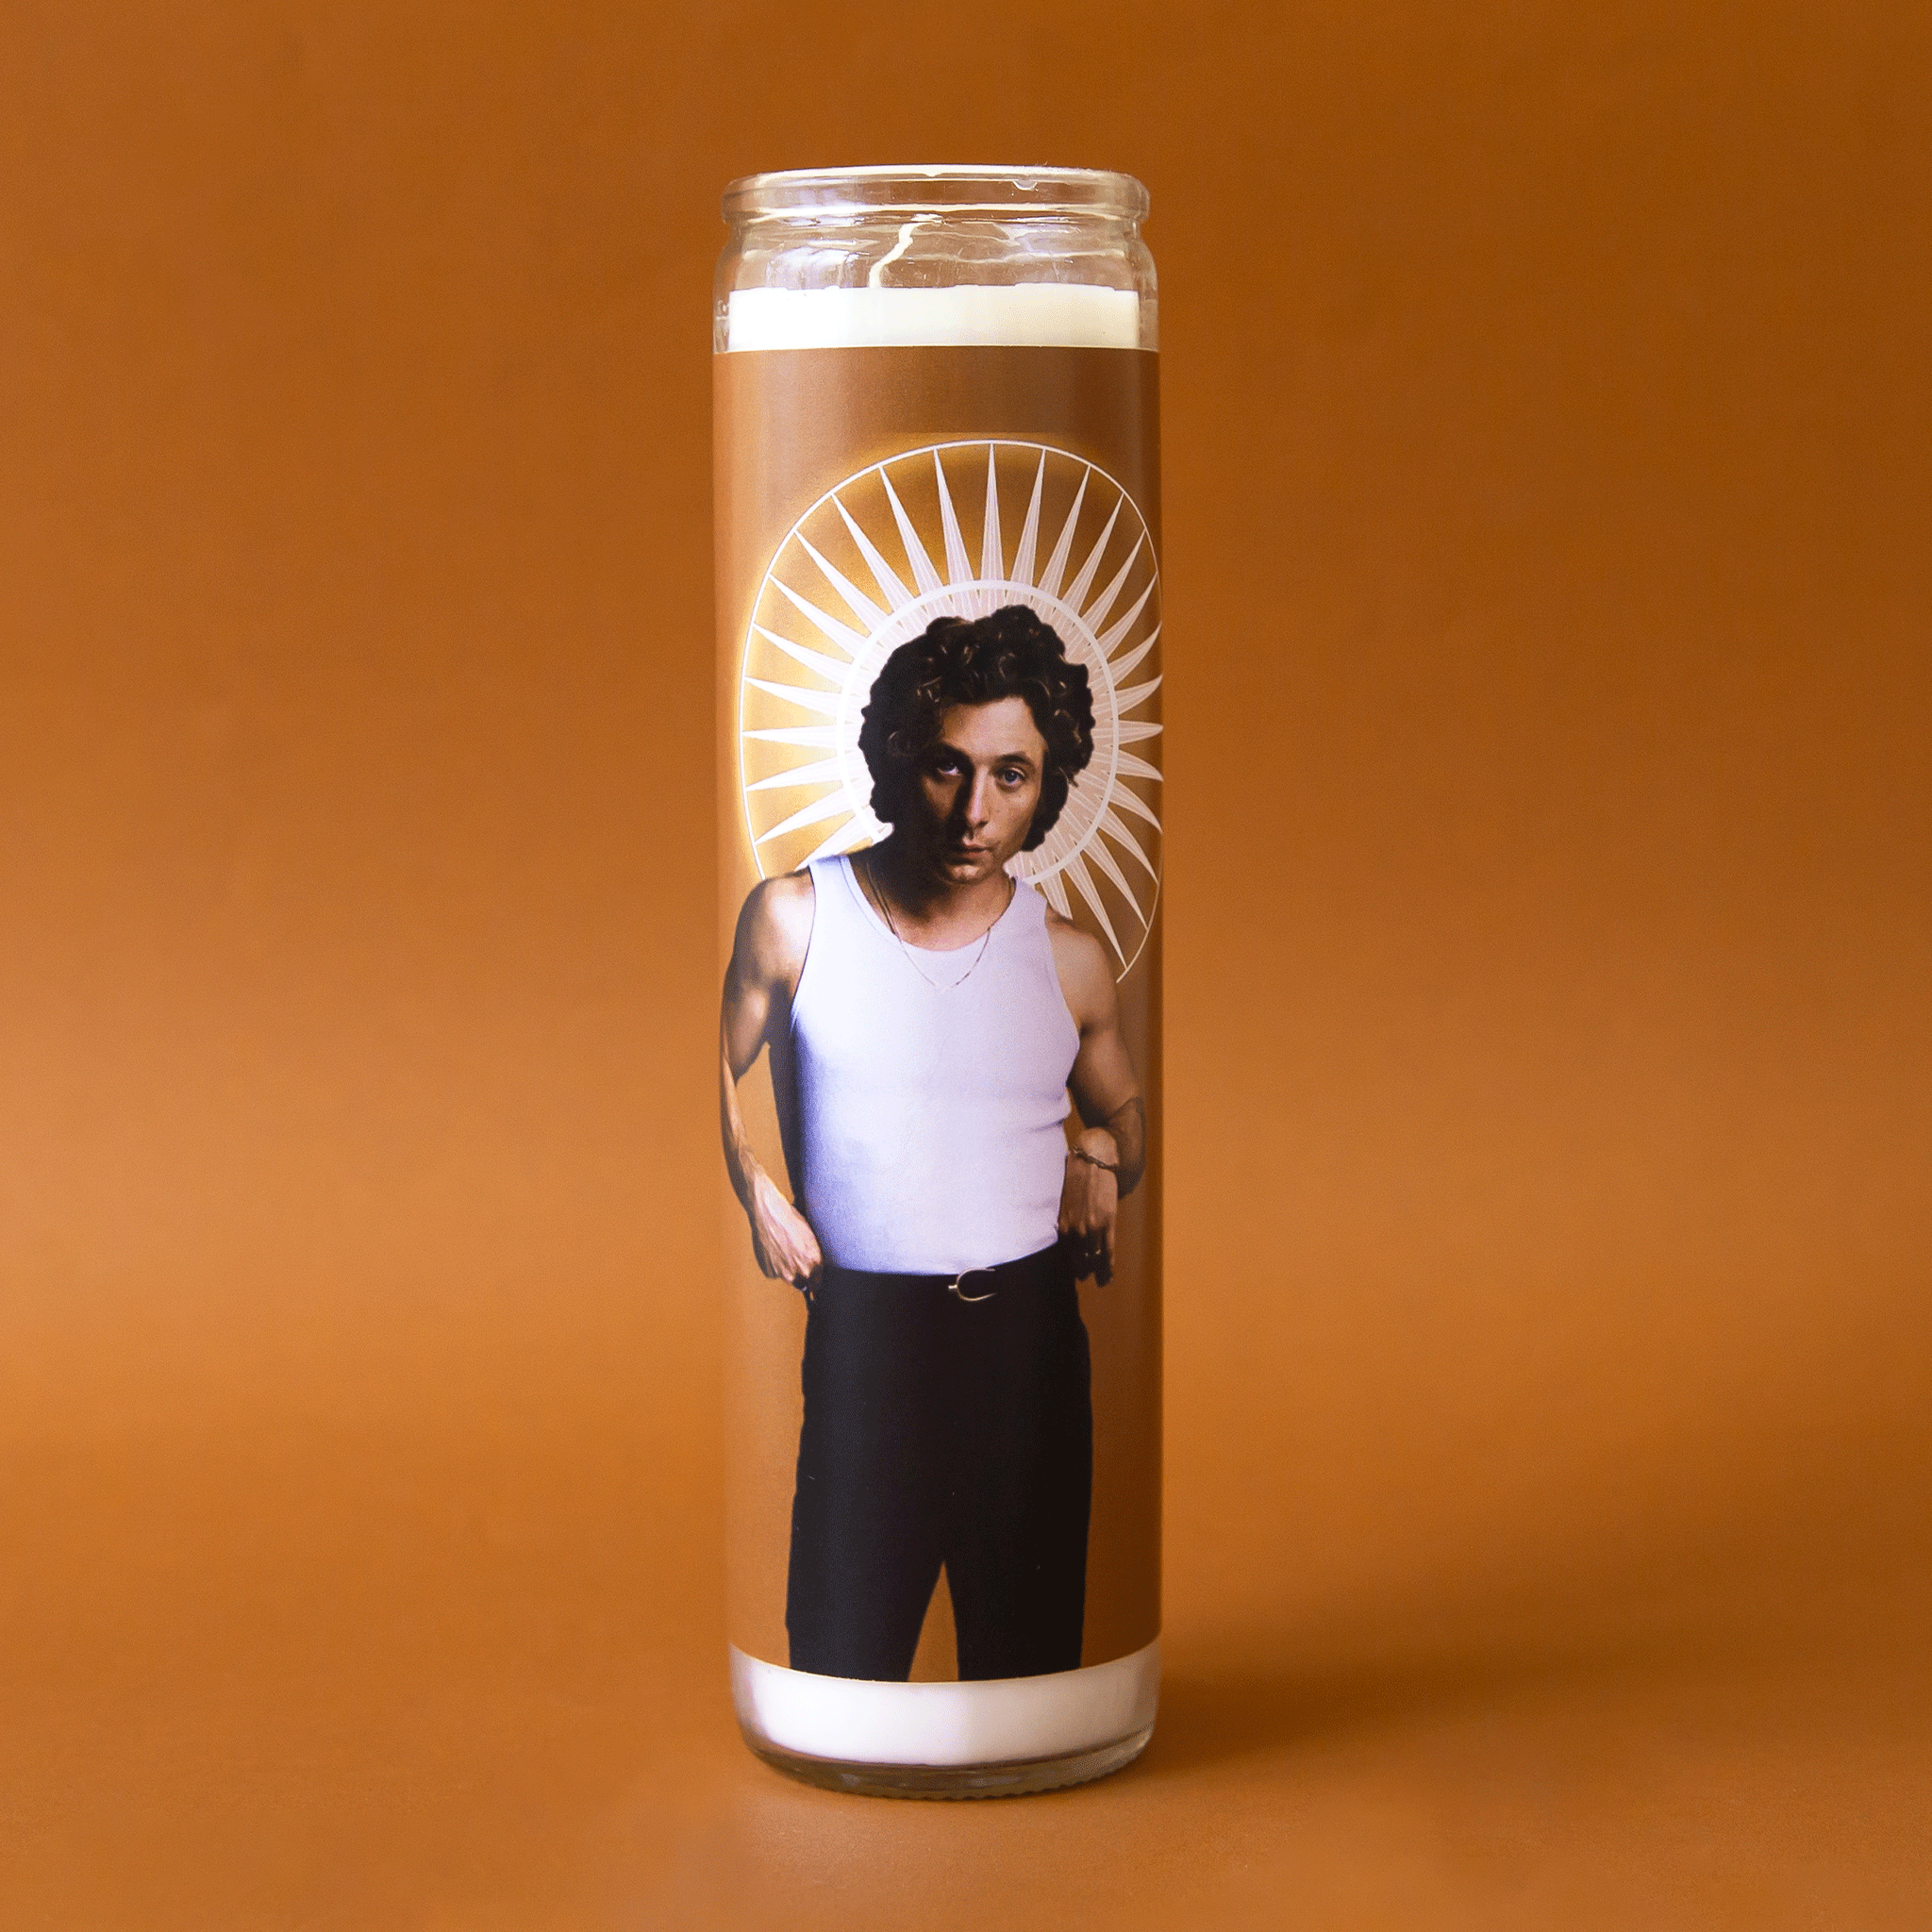 On an orange background is a thin, tall prayer candle with a photo of Jeremy Allen White on the front wearing a white tank top with black pants. 